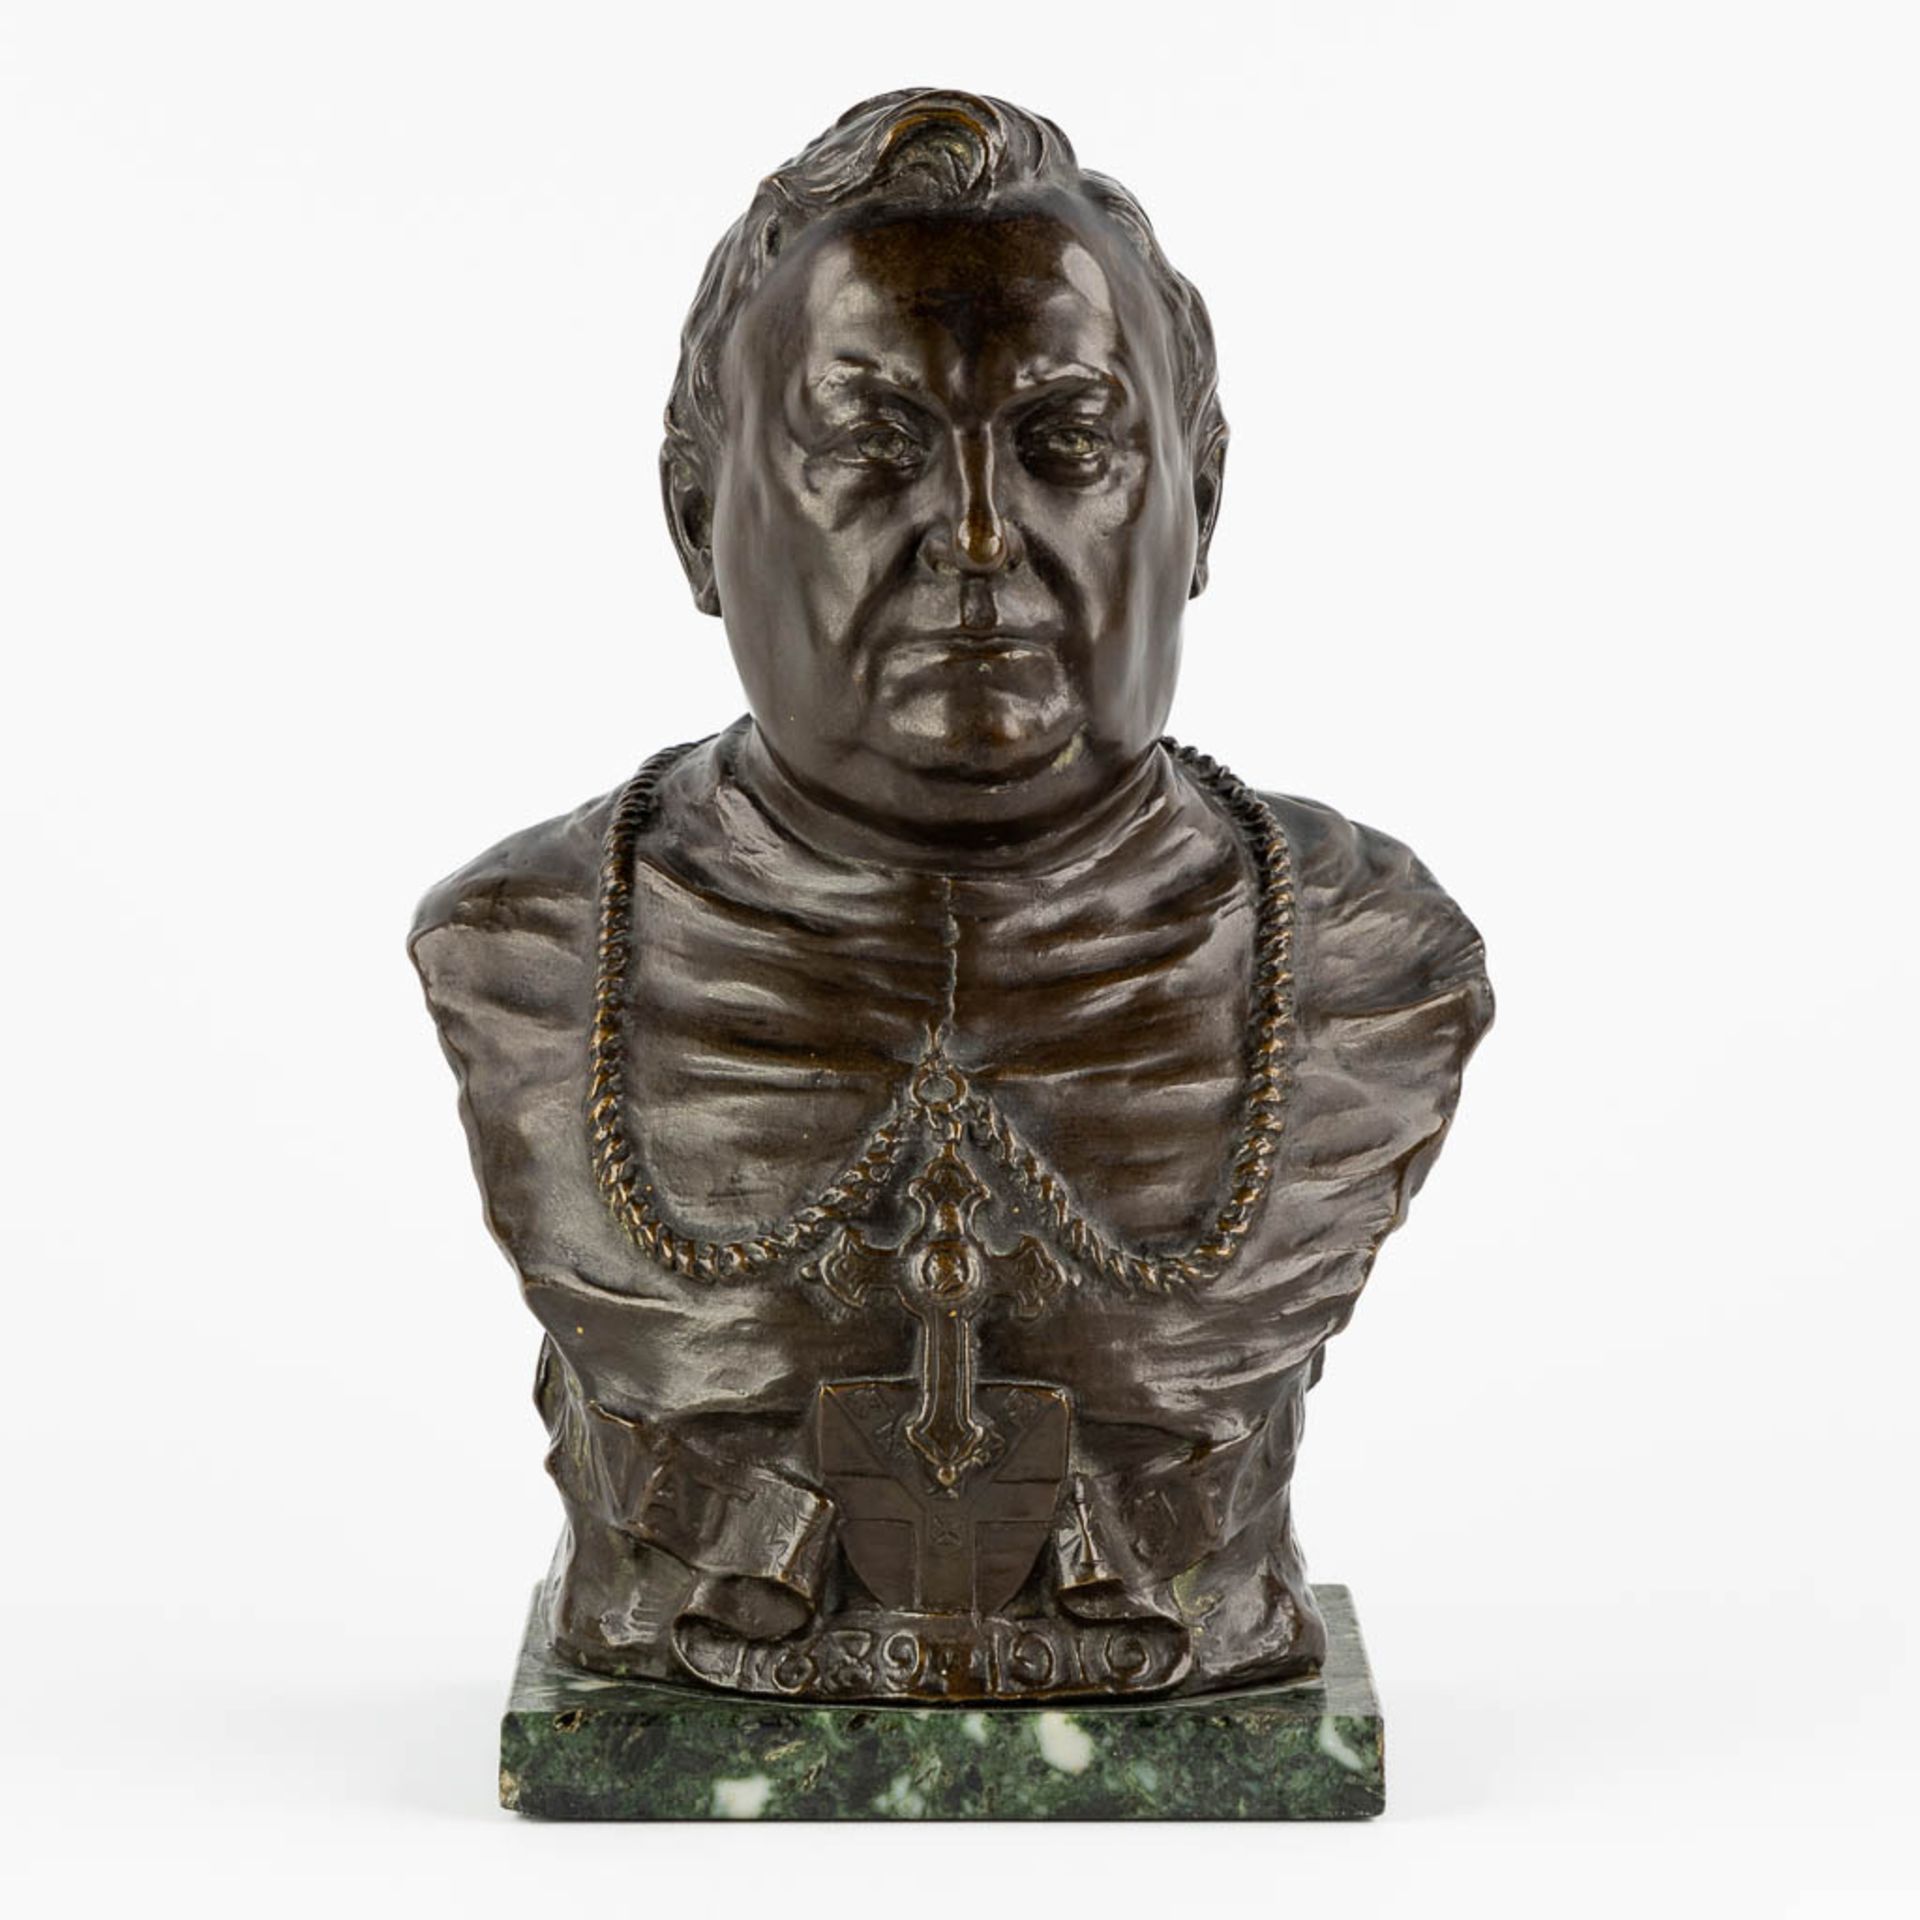 Cyriel COUVREUR (1876-1929) A bust of 'Mgr. Stillemans, Bishop of Ghent, 1889-1916', foundry mark by